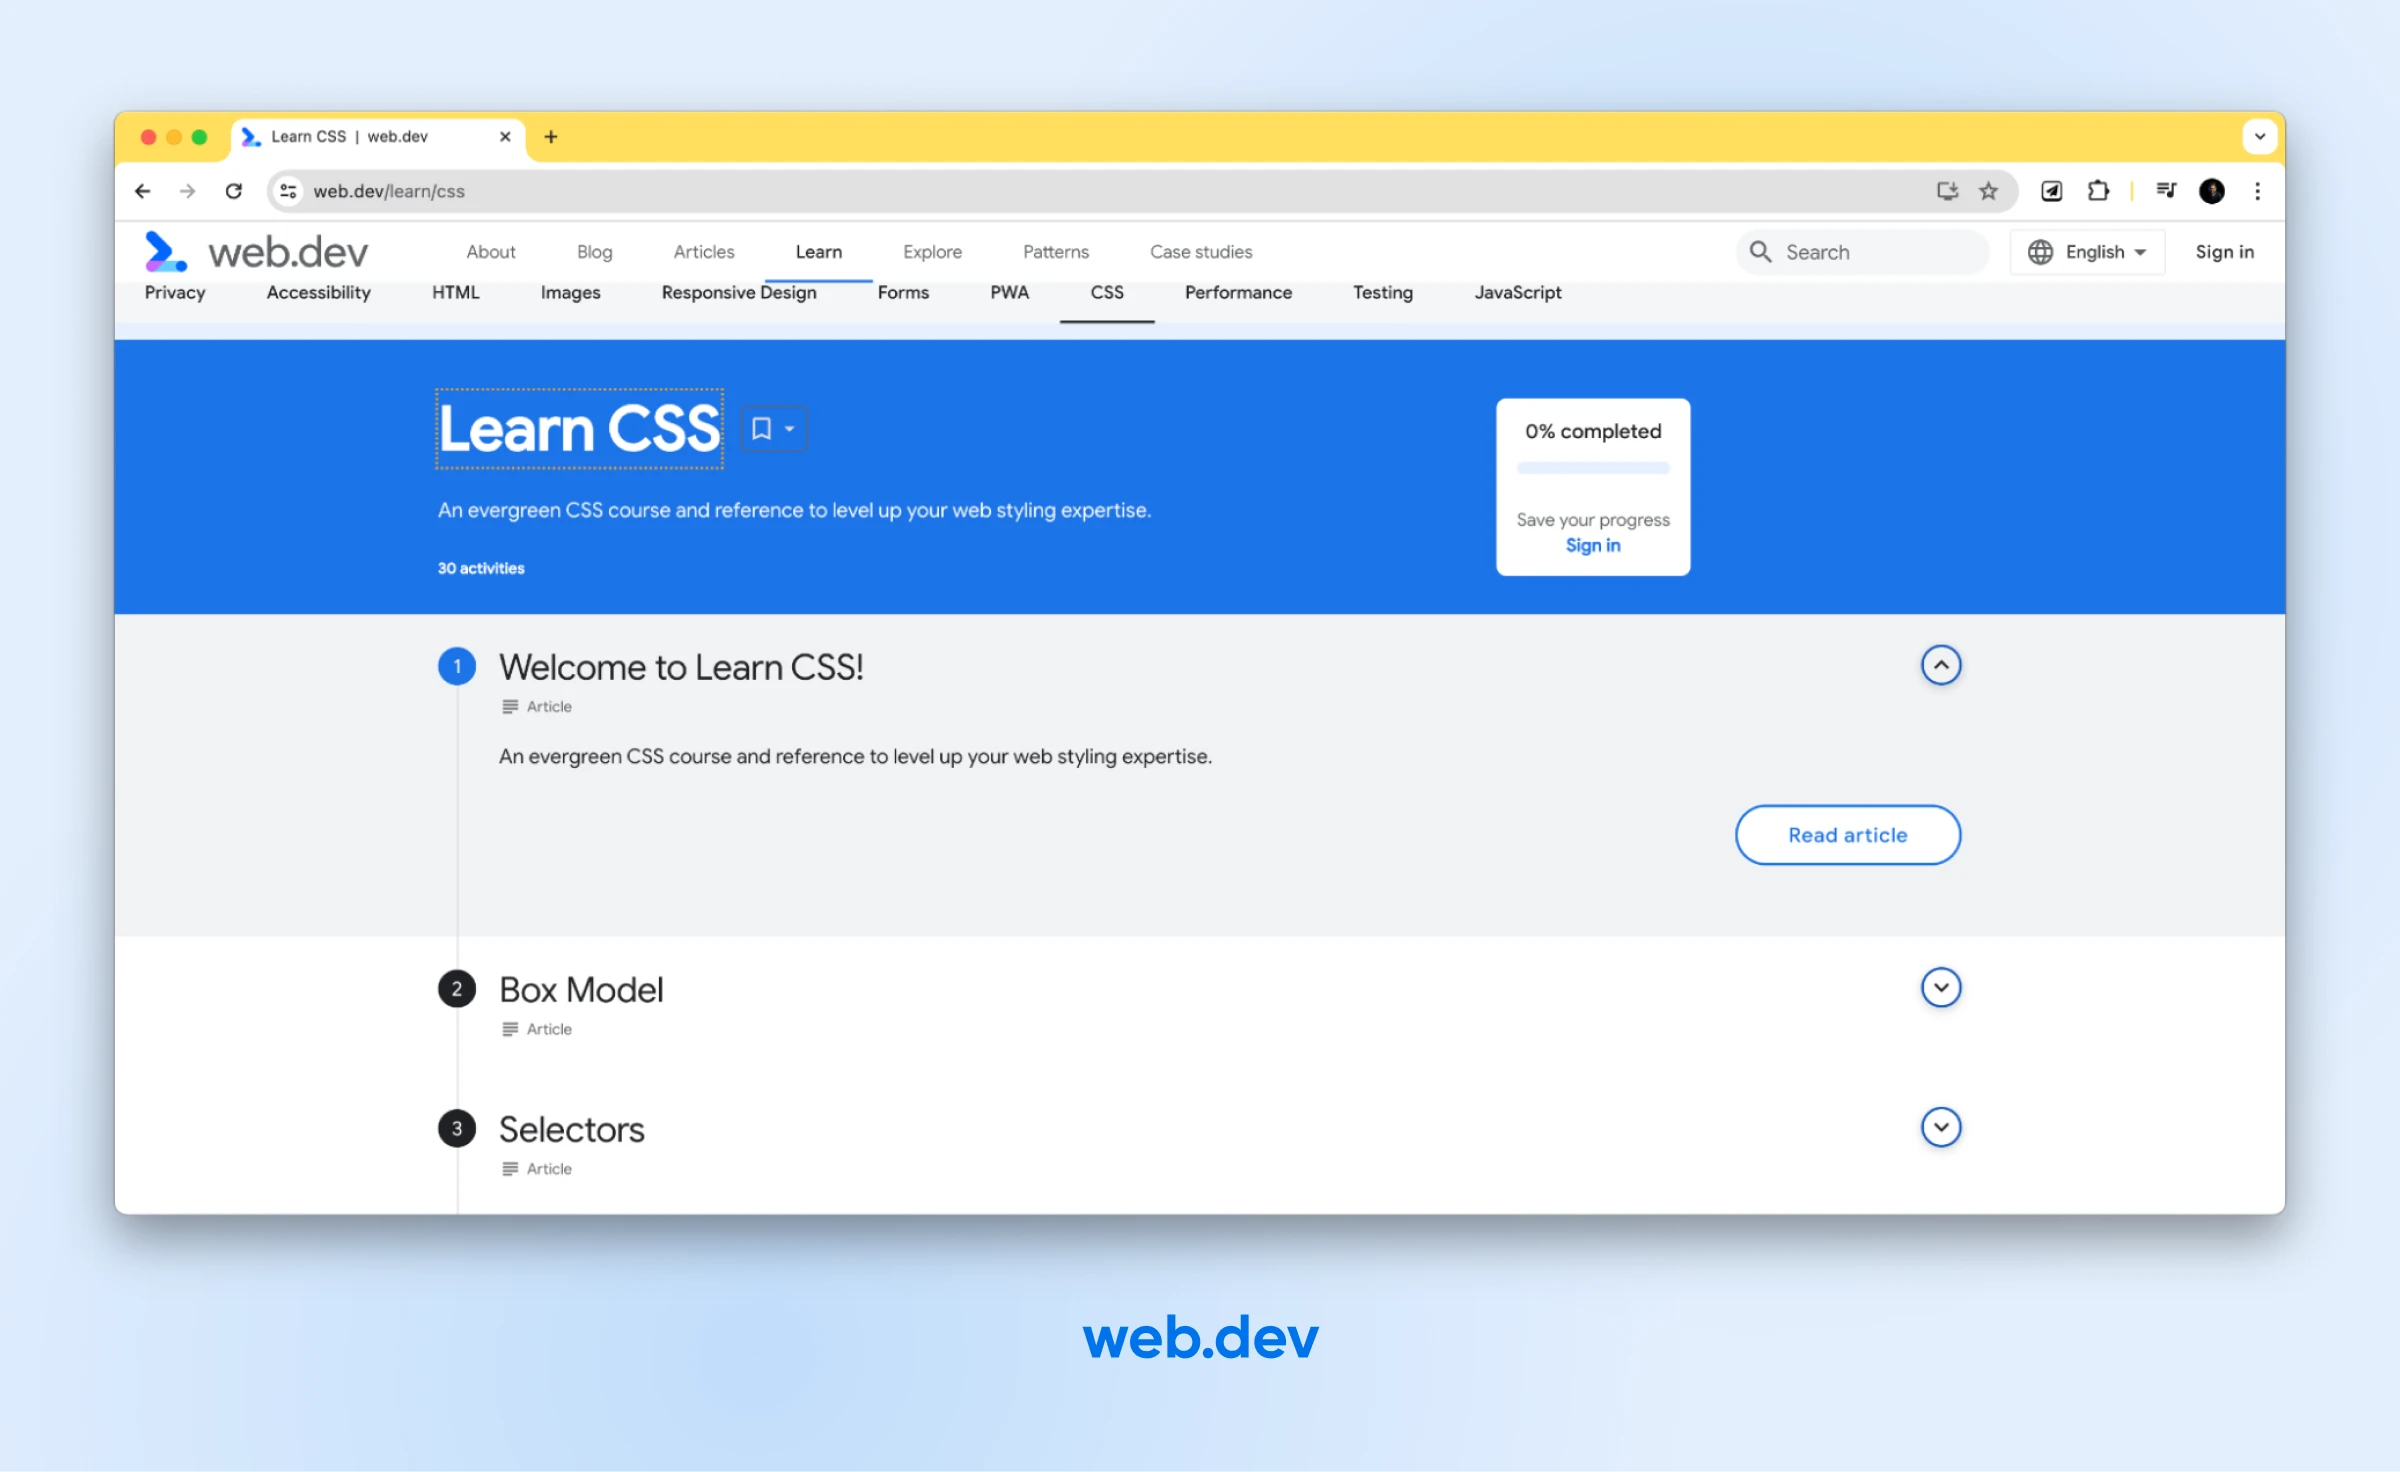 web.dev website's screenshot with a "Learn CSS" course. Ann outline showing two topics covered: Box Model and Selectors.